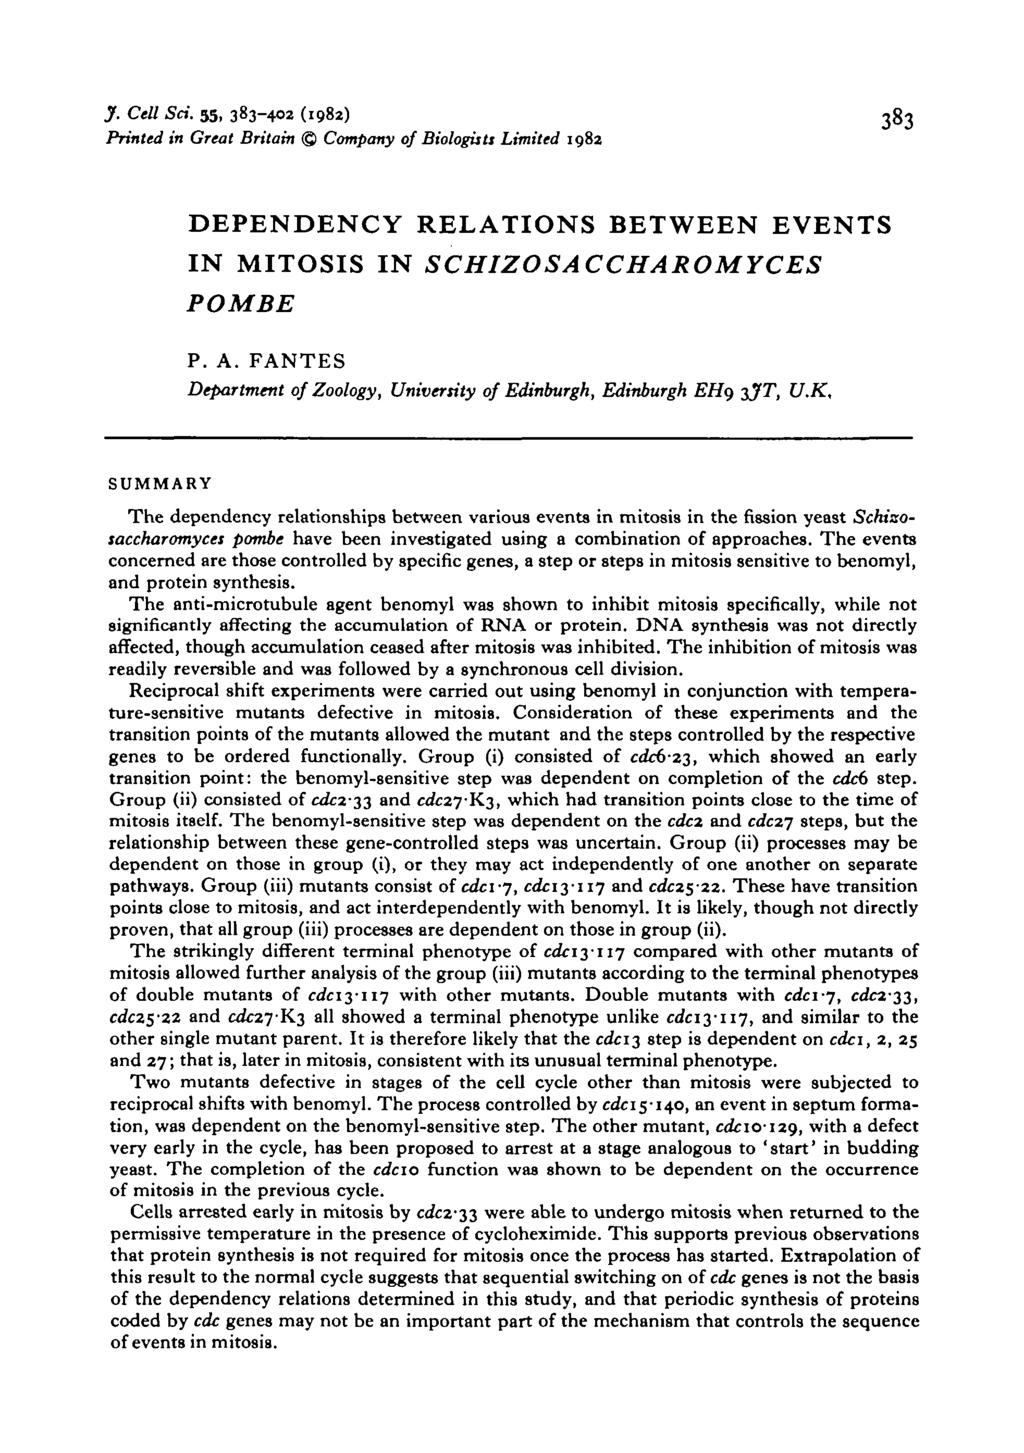 J. Cell Set. 55, 383-402 (1982) 383 Printed in Great Britain Company of Biologists Limited 1982 DEPENDENCY RELATIONS BETWEEN EVENTS IN MITOSIS IN SCHIZOSACCHAROMYCES POMBE P. A.